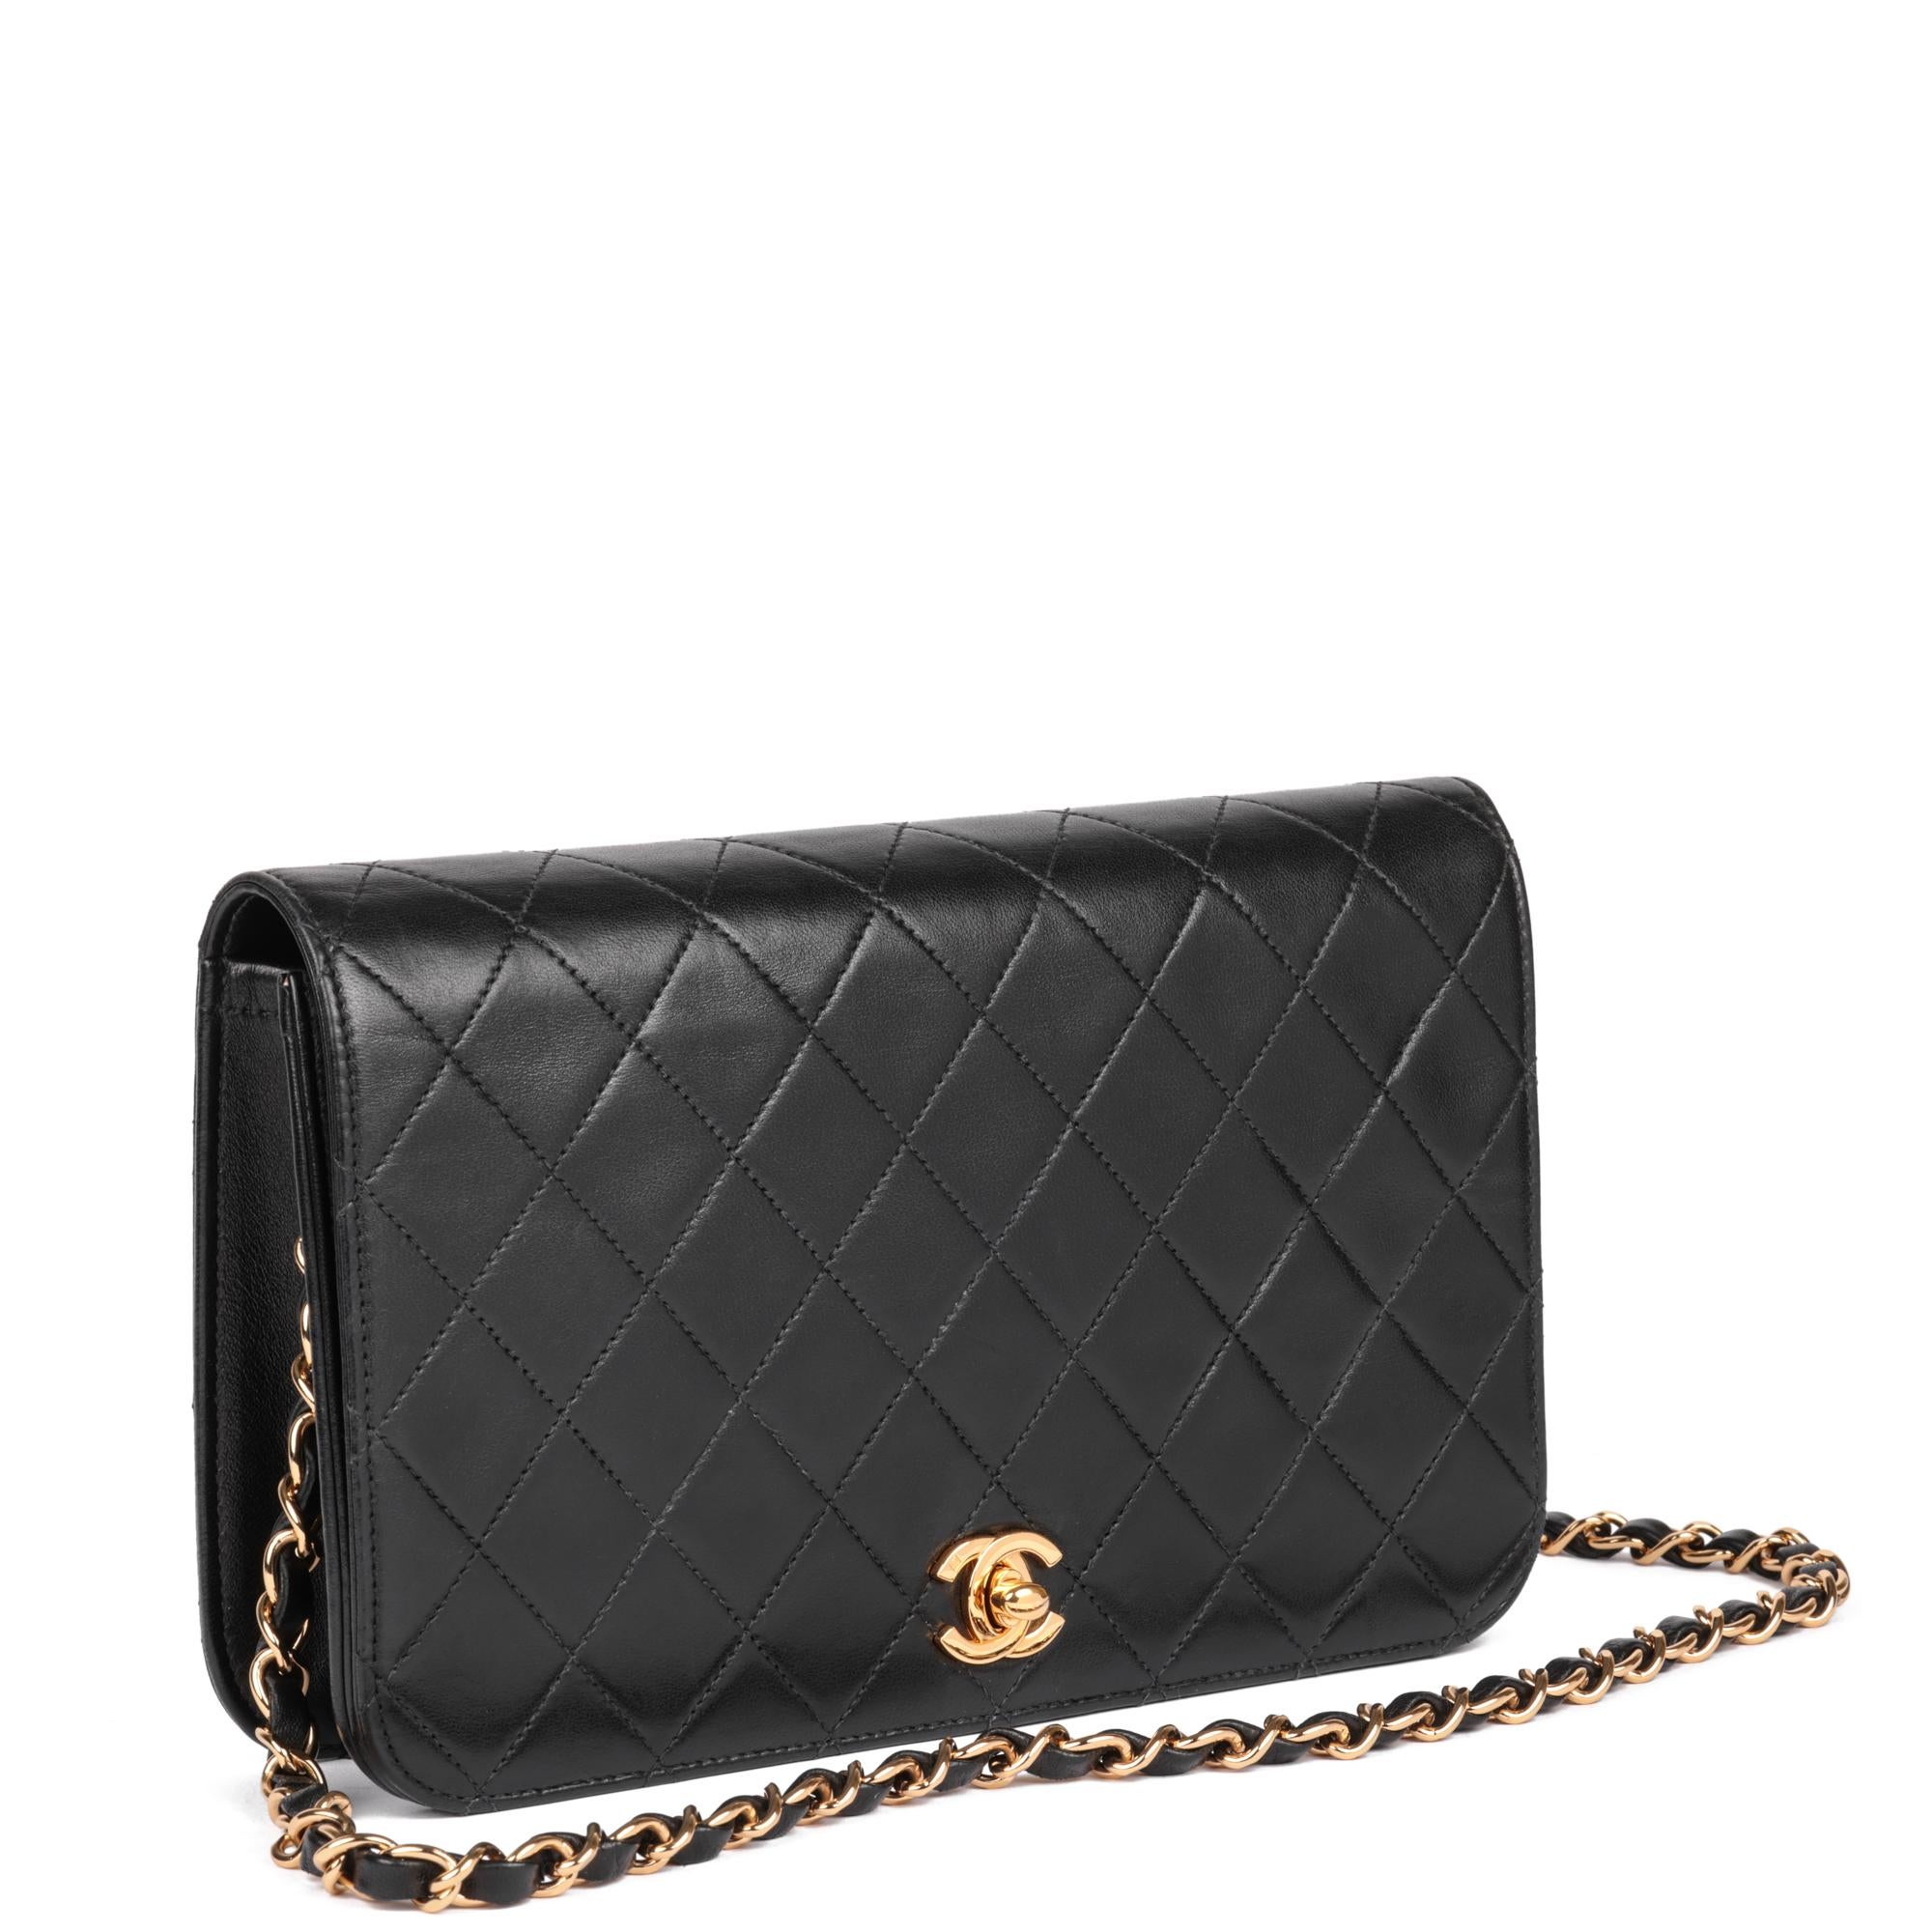 CHANEL
Black Quilted Lambskin Vintage Small Classic Single Full Flap Bag

Xupes Reference: HB5221
Serial Number: 6518383
Age (Circa): 2000
Accompanied By: Chanel Dust Bag, Authenticity Card
Authenticity Details: Authenticity Card, Serial Sticker